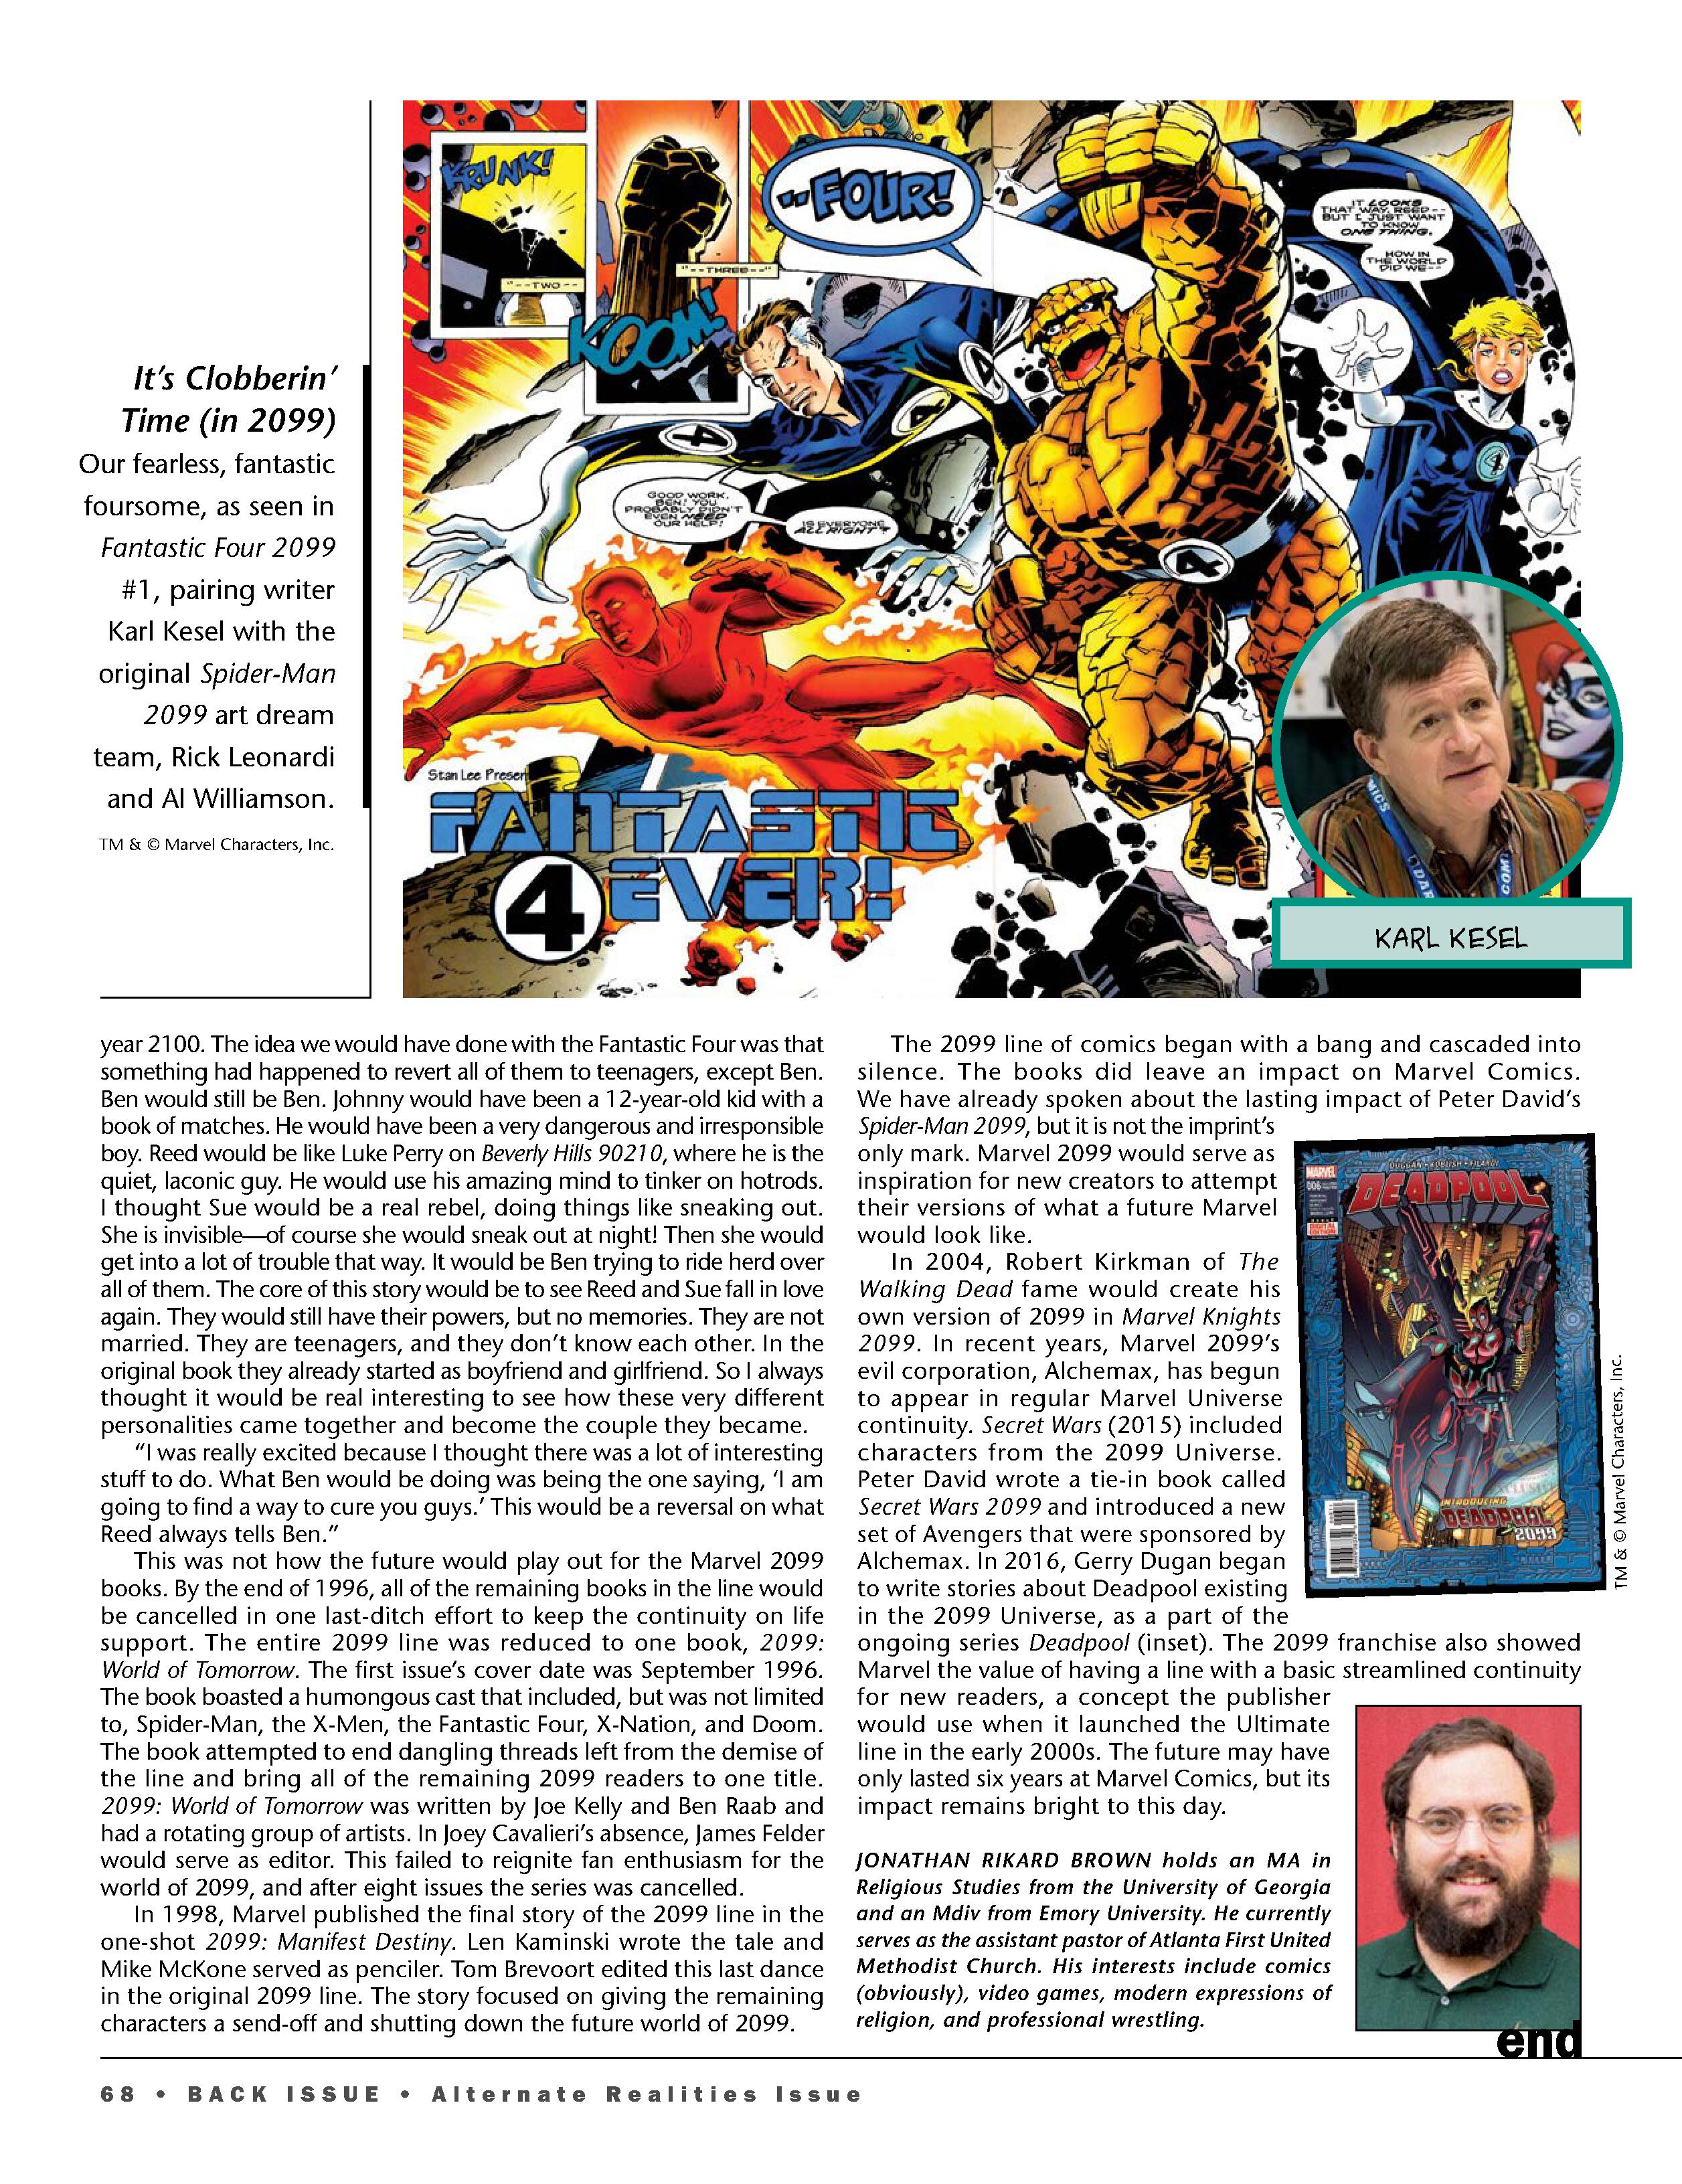 Read online Back Issue comic -  Issue #111 - 70